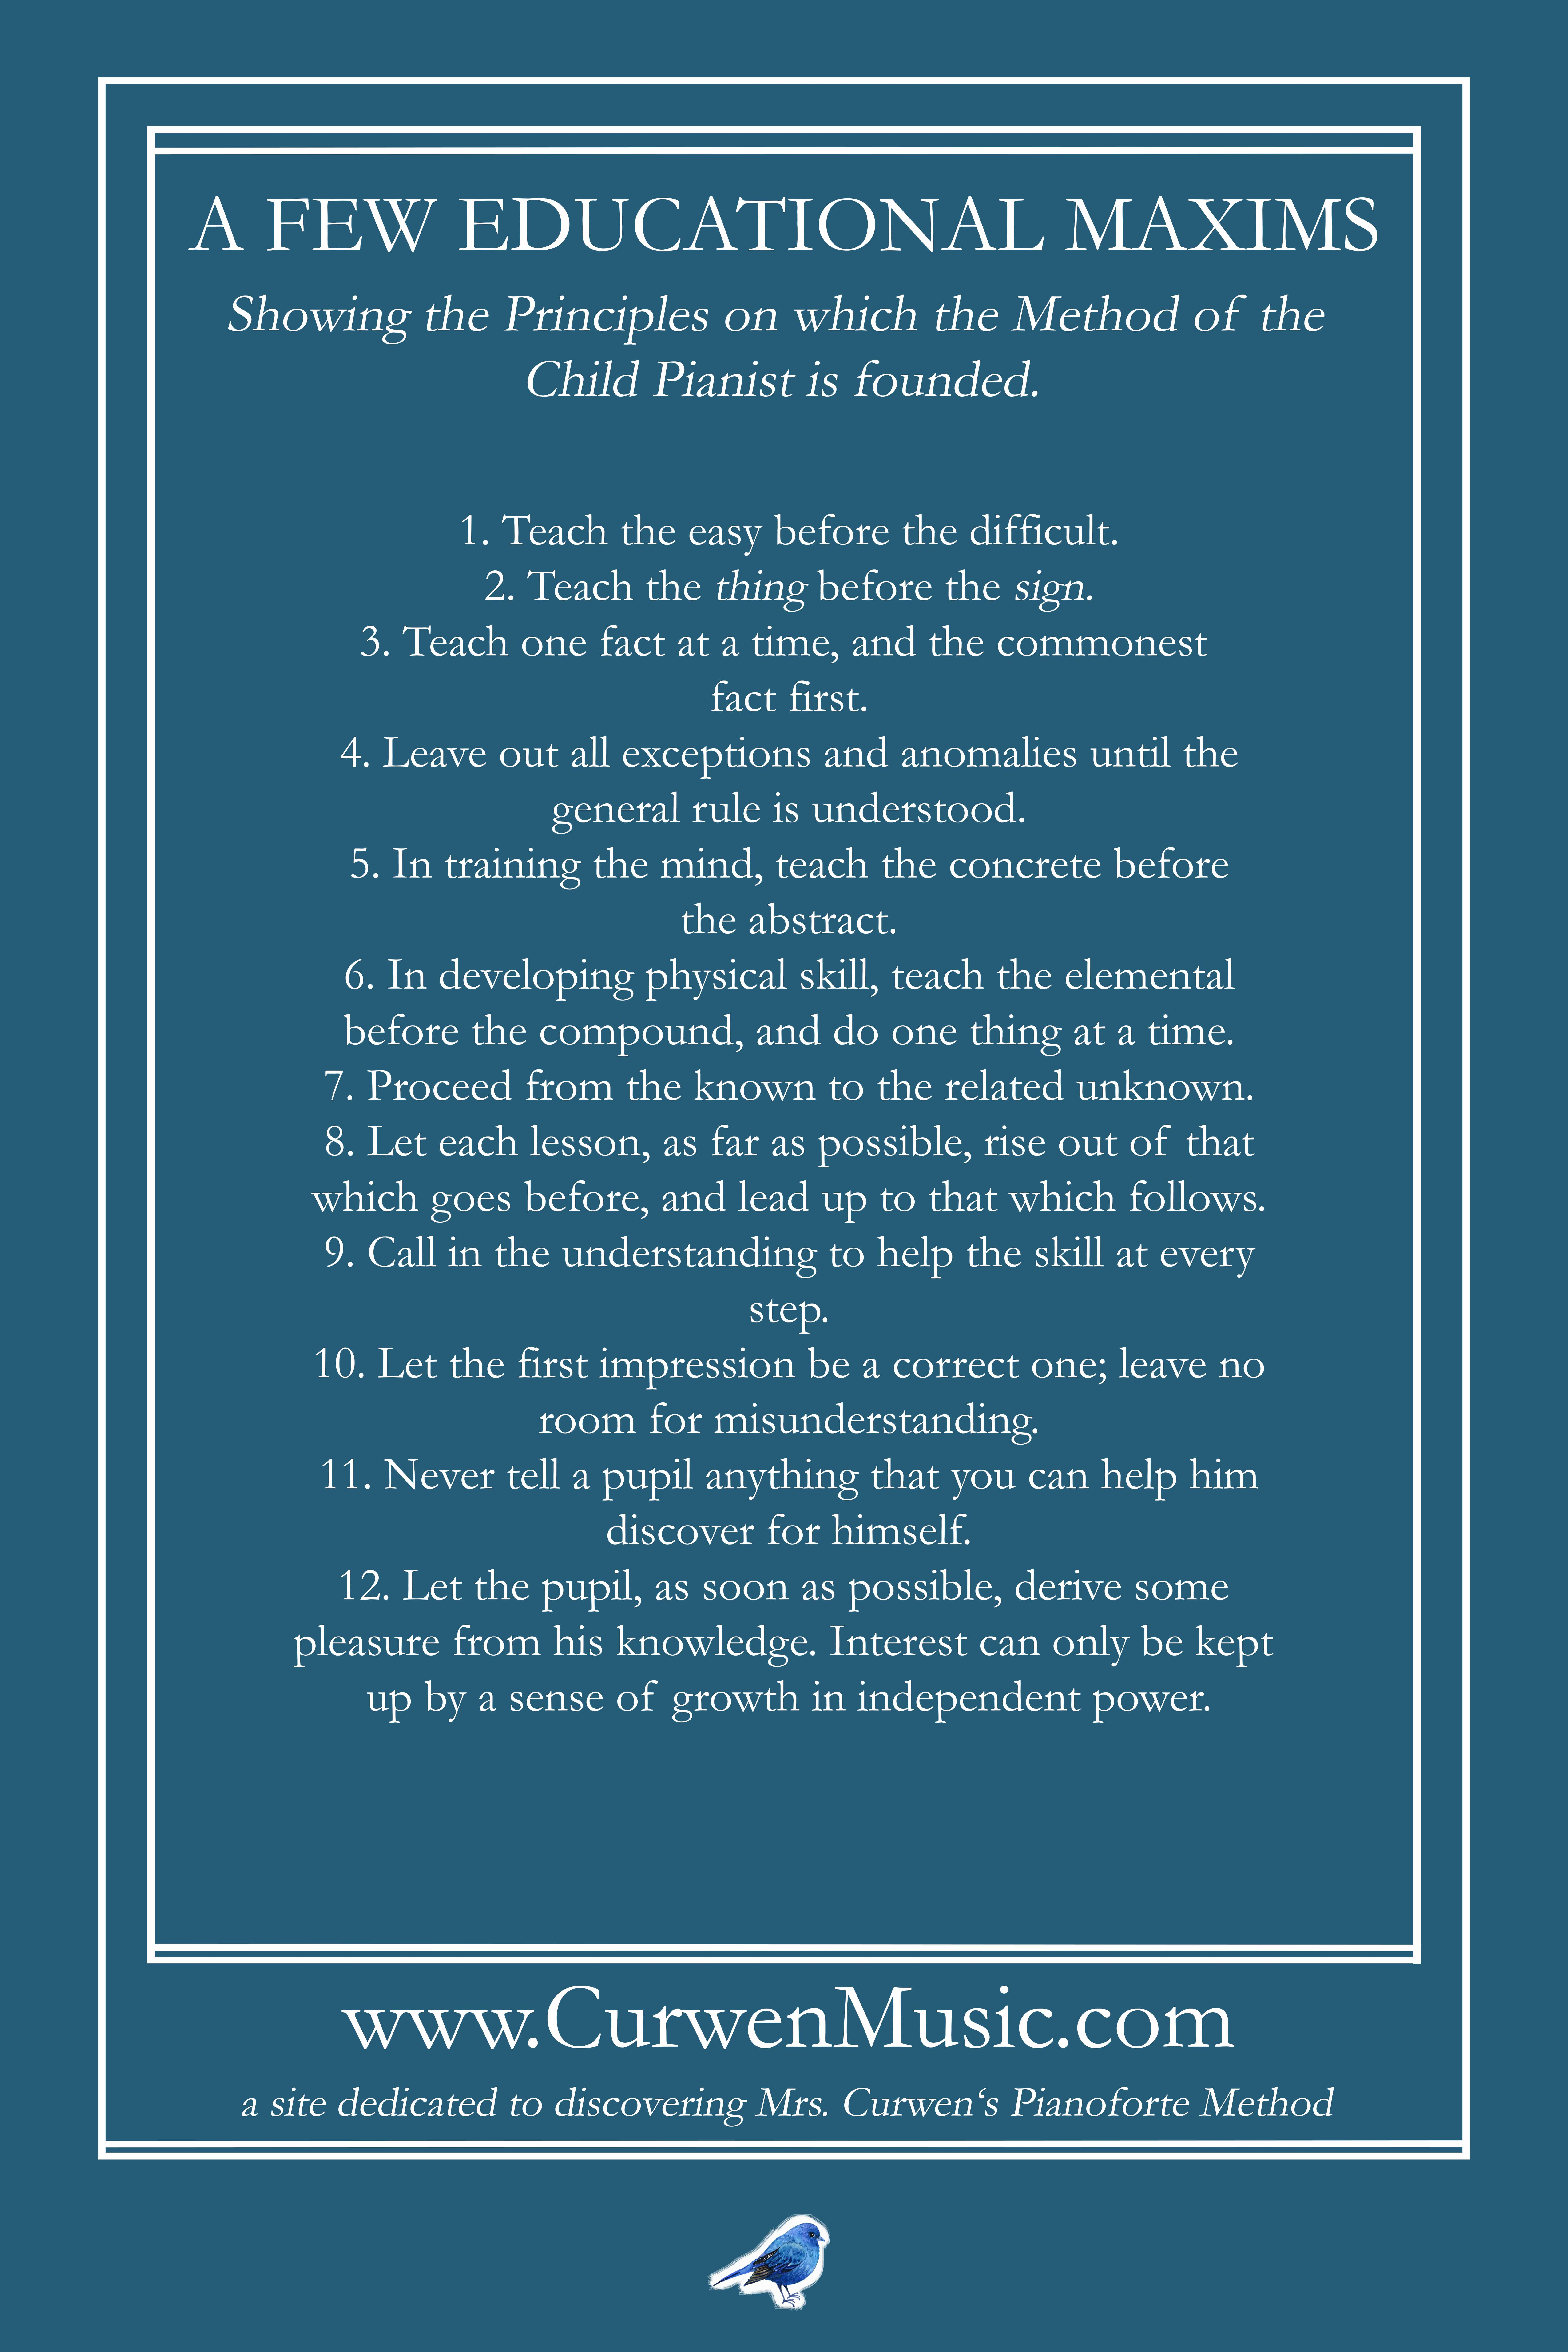 Mrs. Curwen's 12 educational maxims